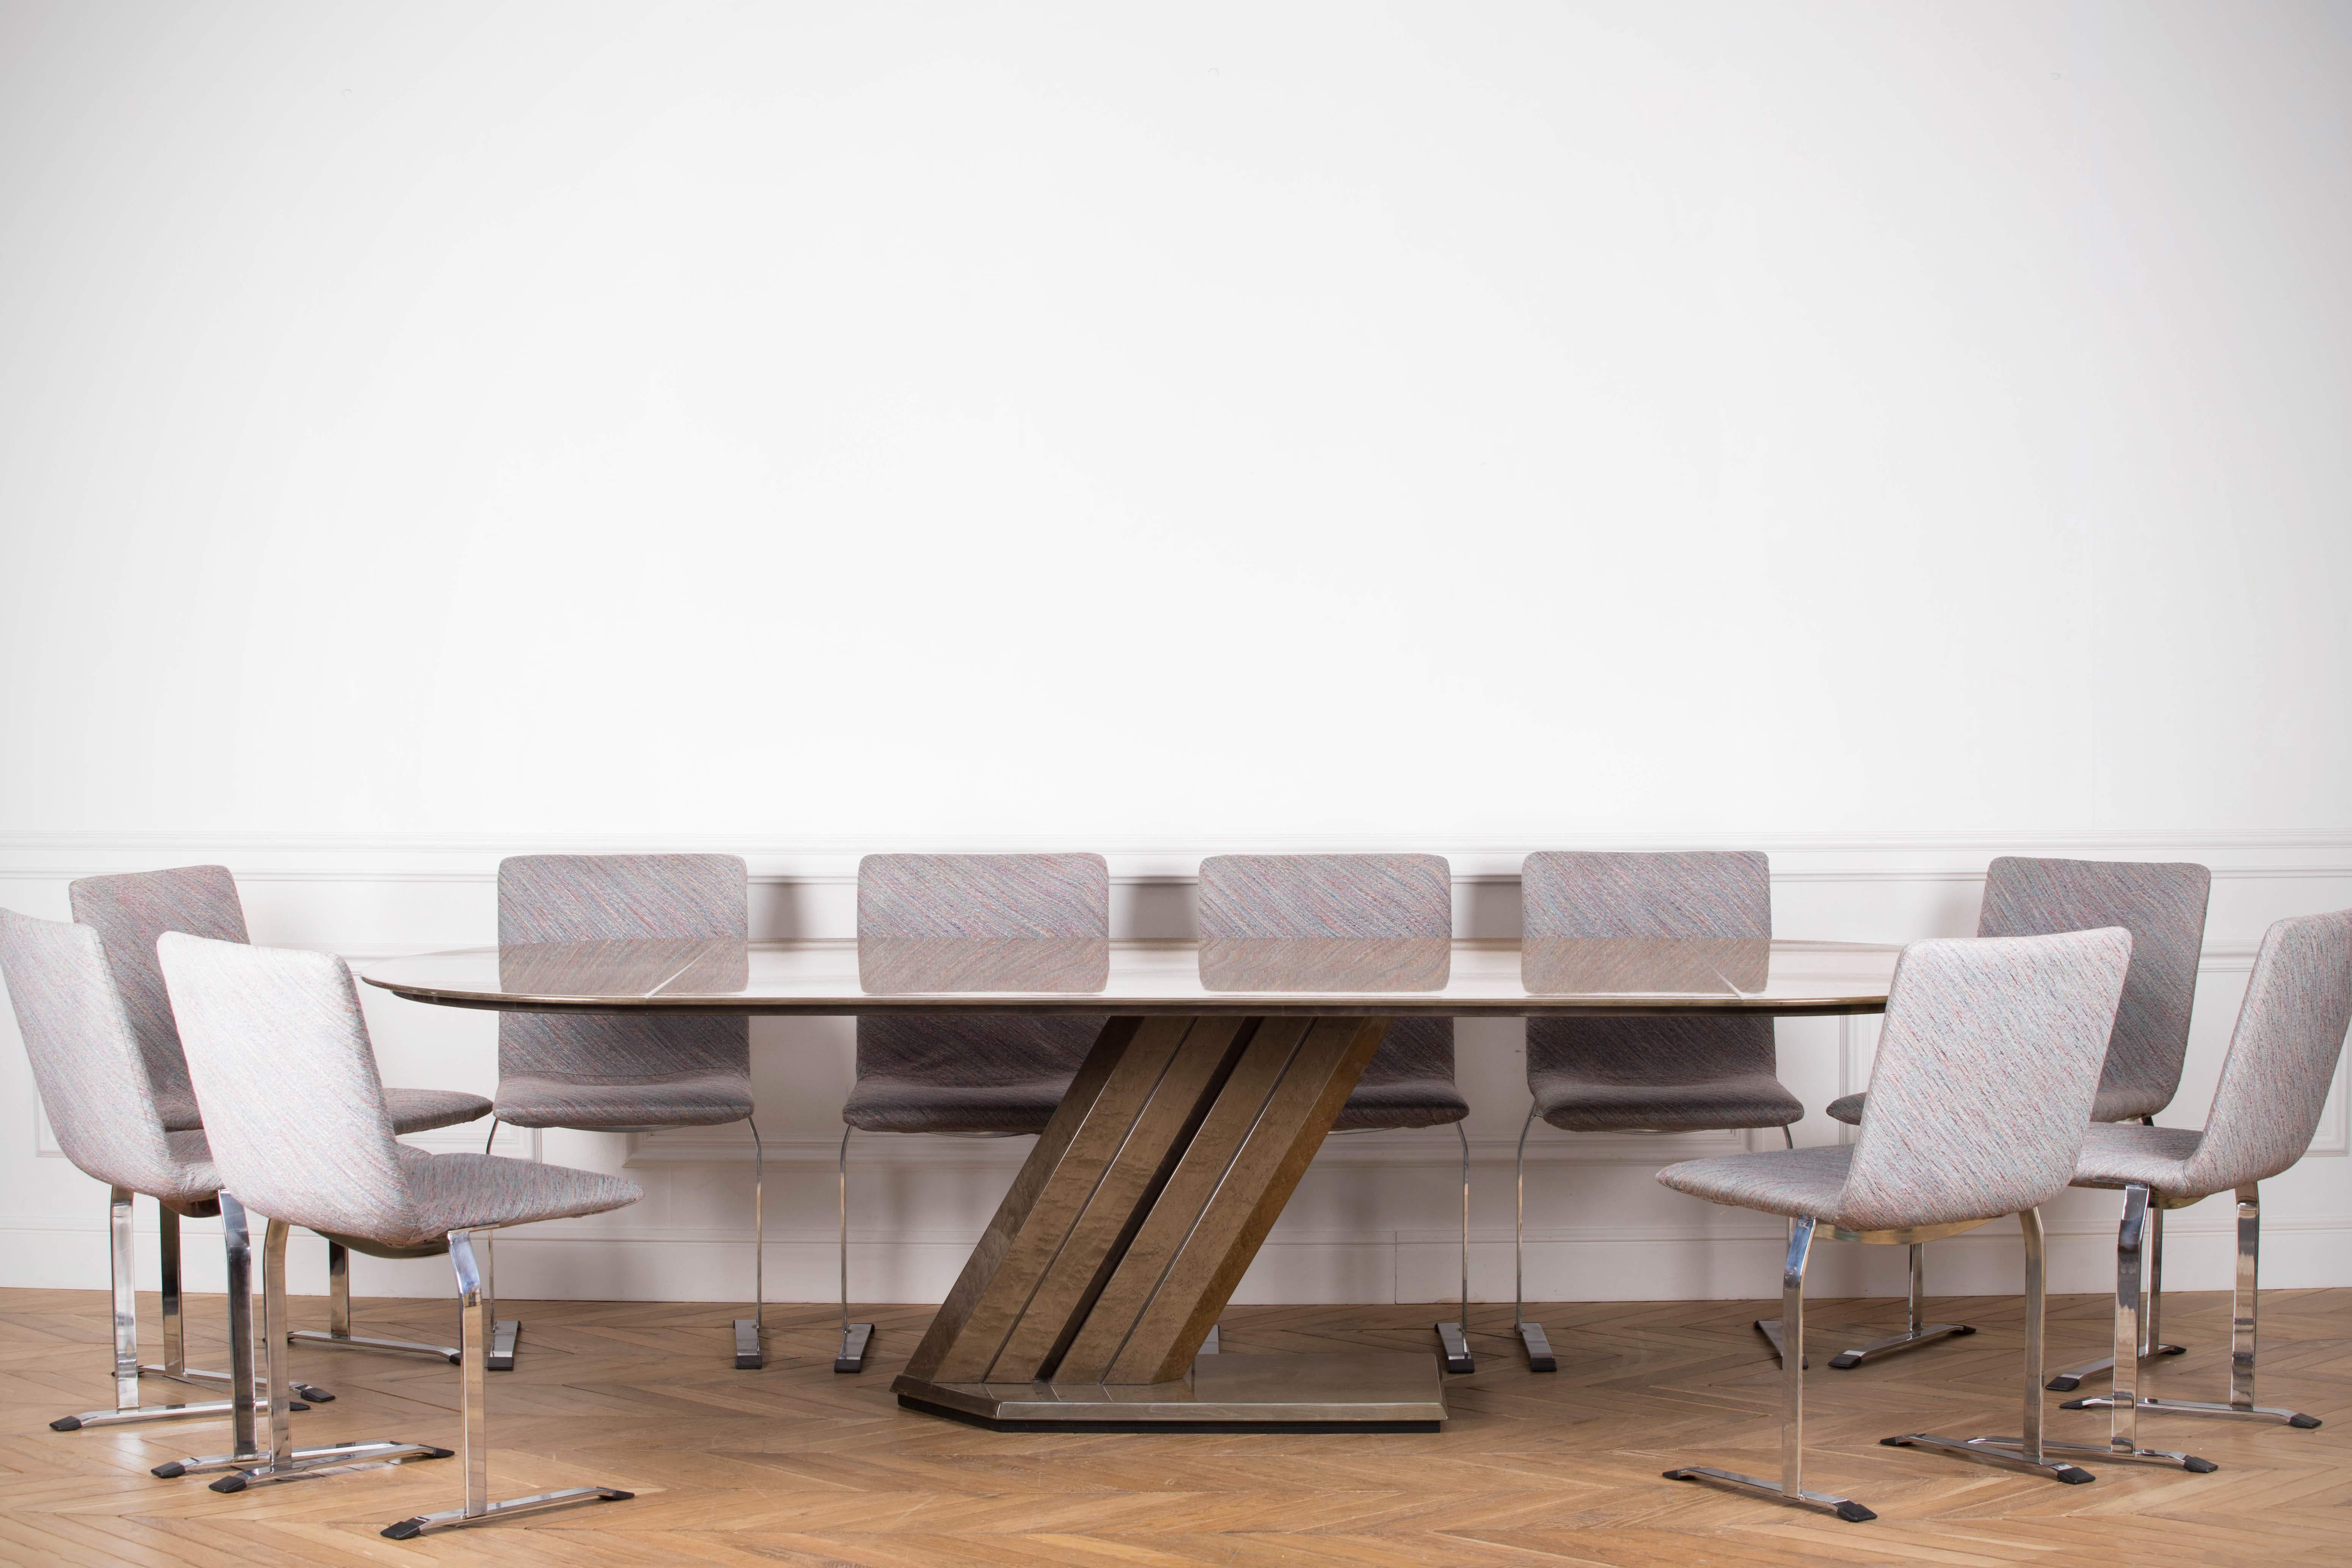 Large conference table edited by Saporiti on a project by Giovanni Offredi in 1970.
Bird’s-eye maple veneer finished in pearl polish. Very rare model (the only one on the market at this moment), Postmodern design.
Good condition, a defect of